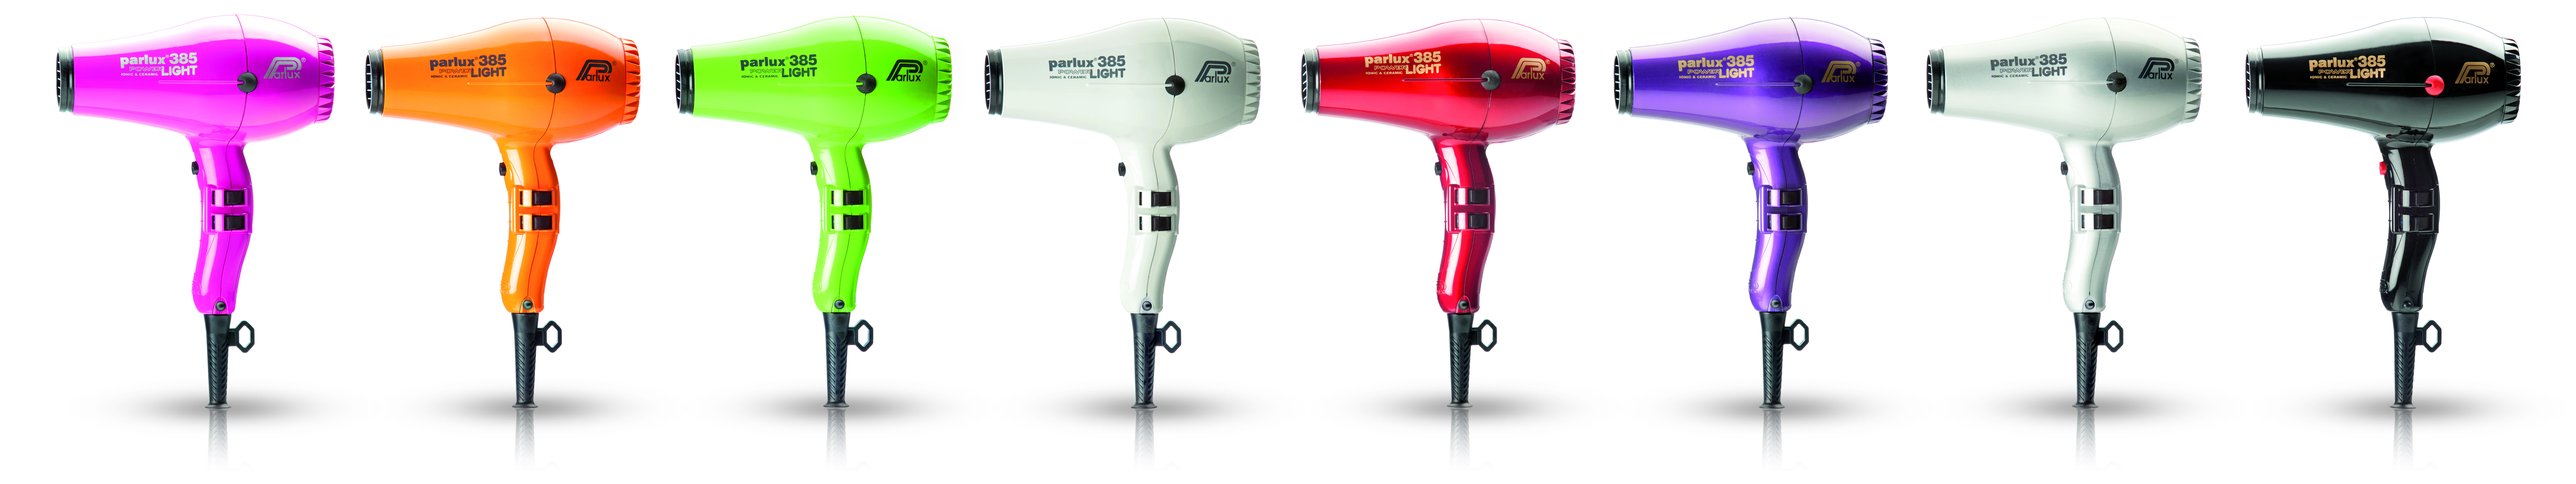 Parlux 385 Power Light Ceramic and Ionic Hair Dryer - information online from i-glamour.com